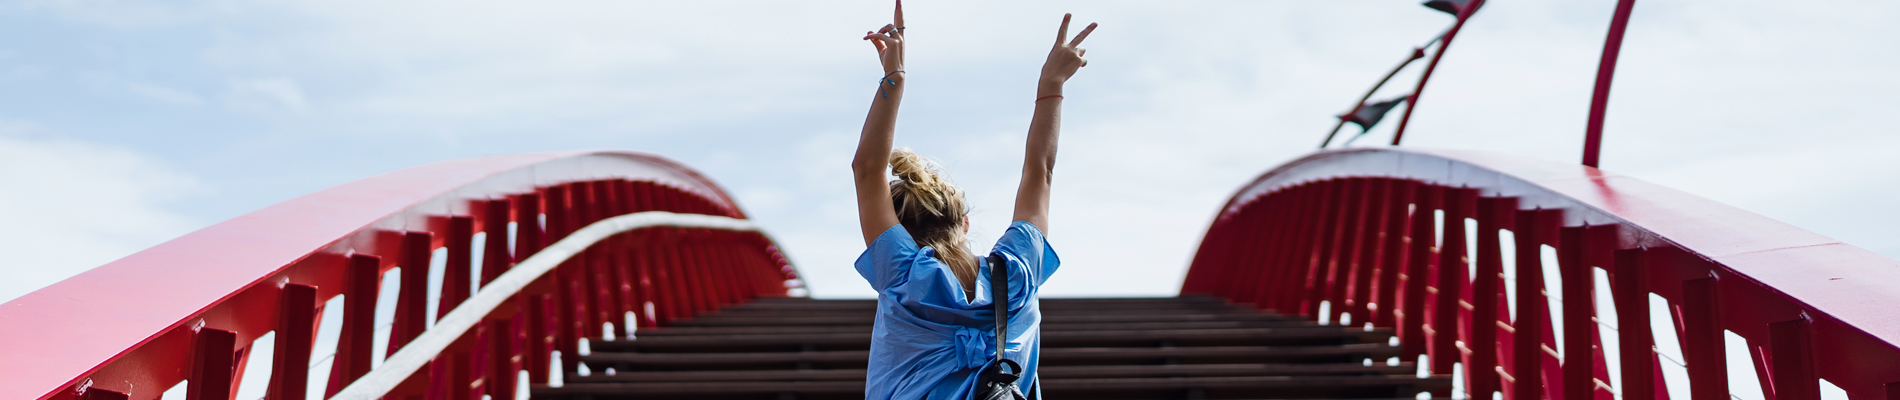 woman with arms raised in celebration at the top of an arched walkway bridge